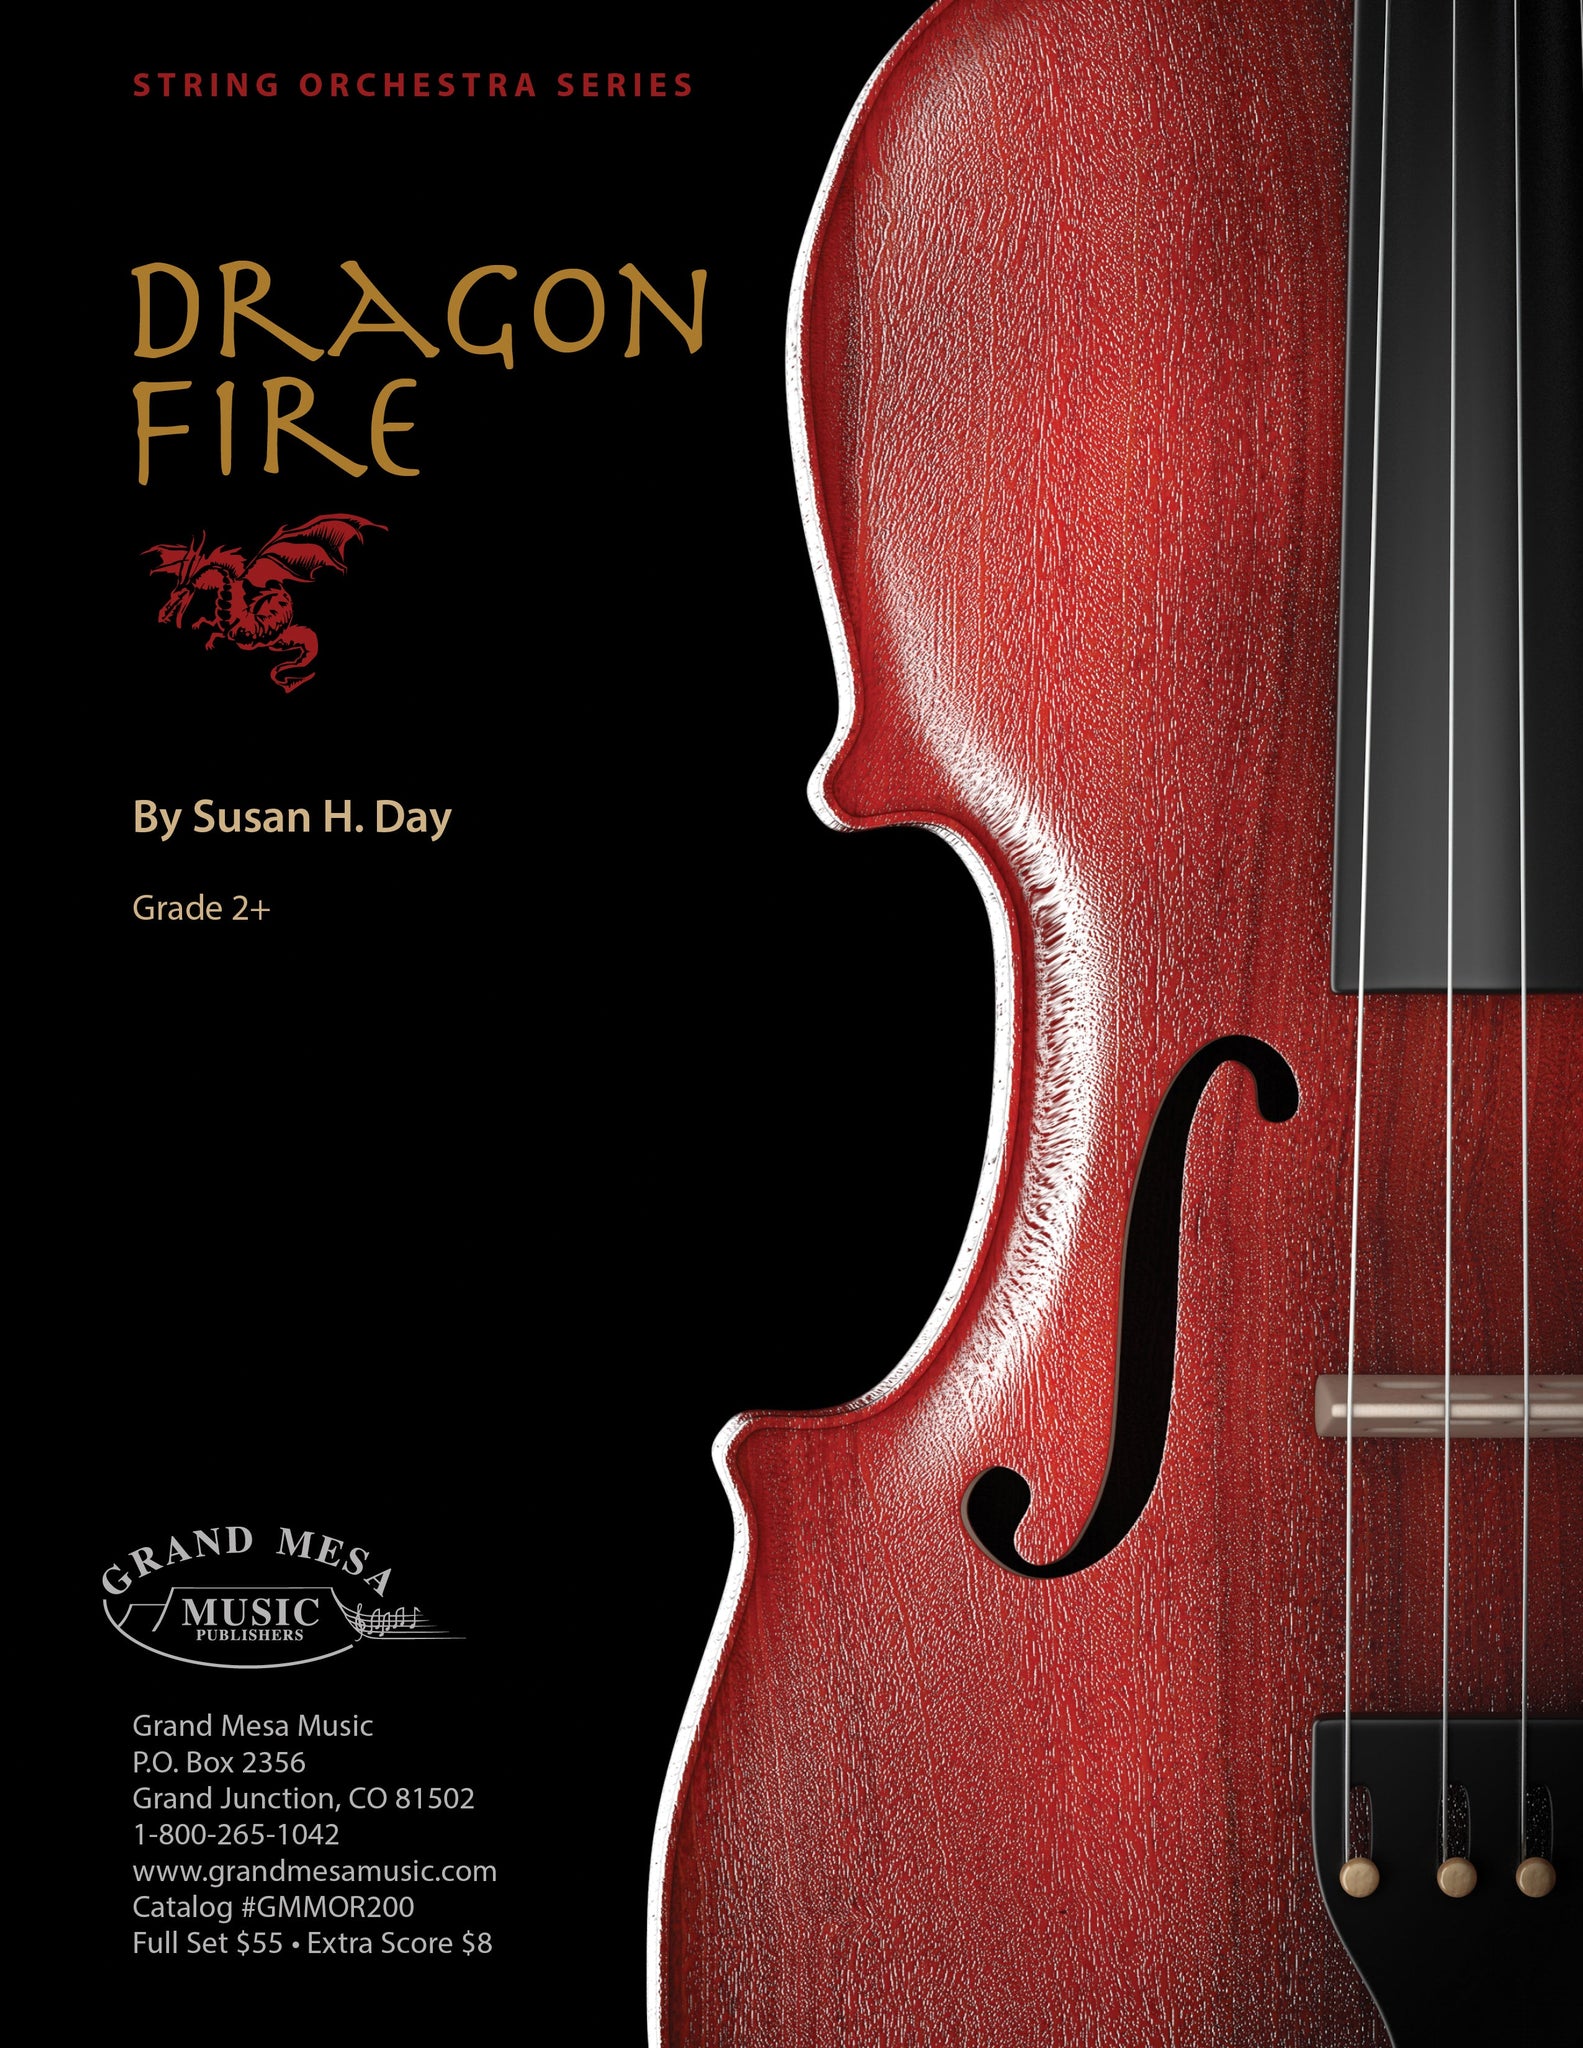 Strings sheet music cover of Dragon Fire, composed by Susan Day.